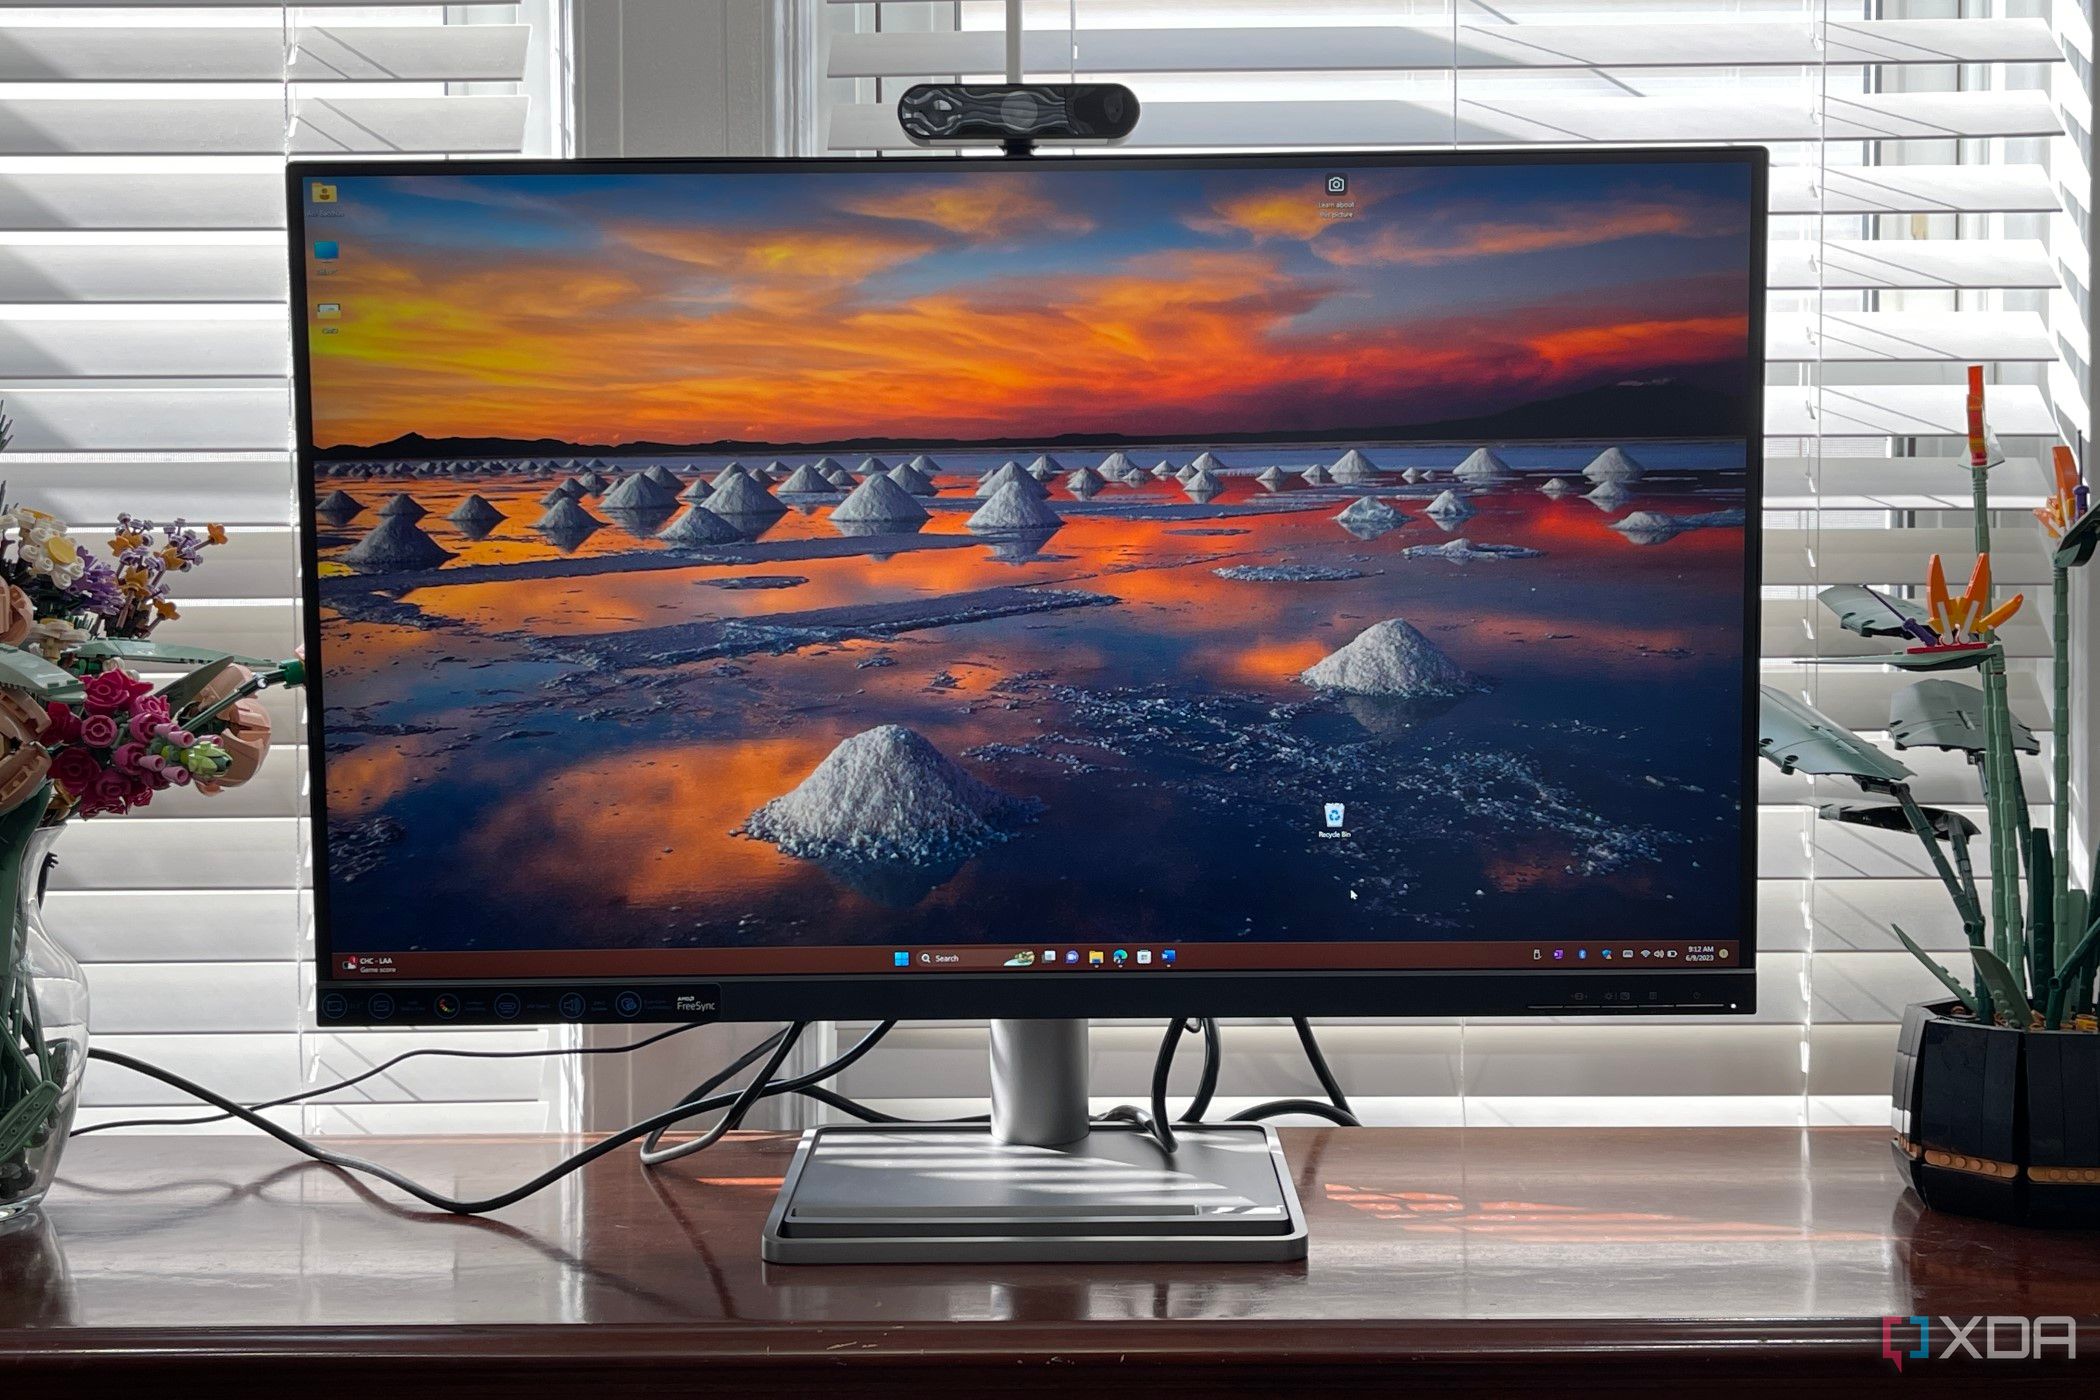 Lenovo L32p-30 Monitor review: A great 4K budget gaming monitor with some small flaws